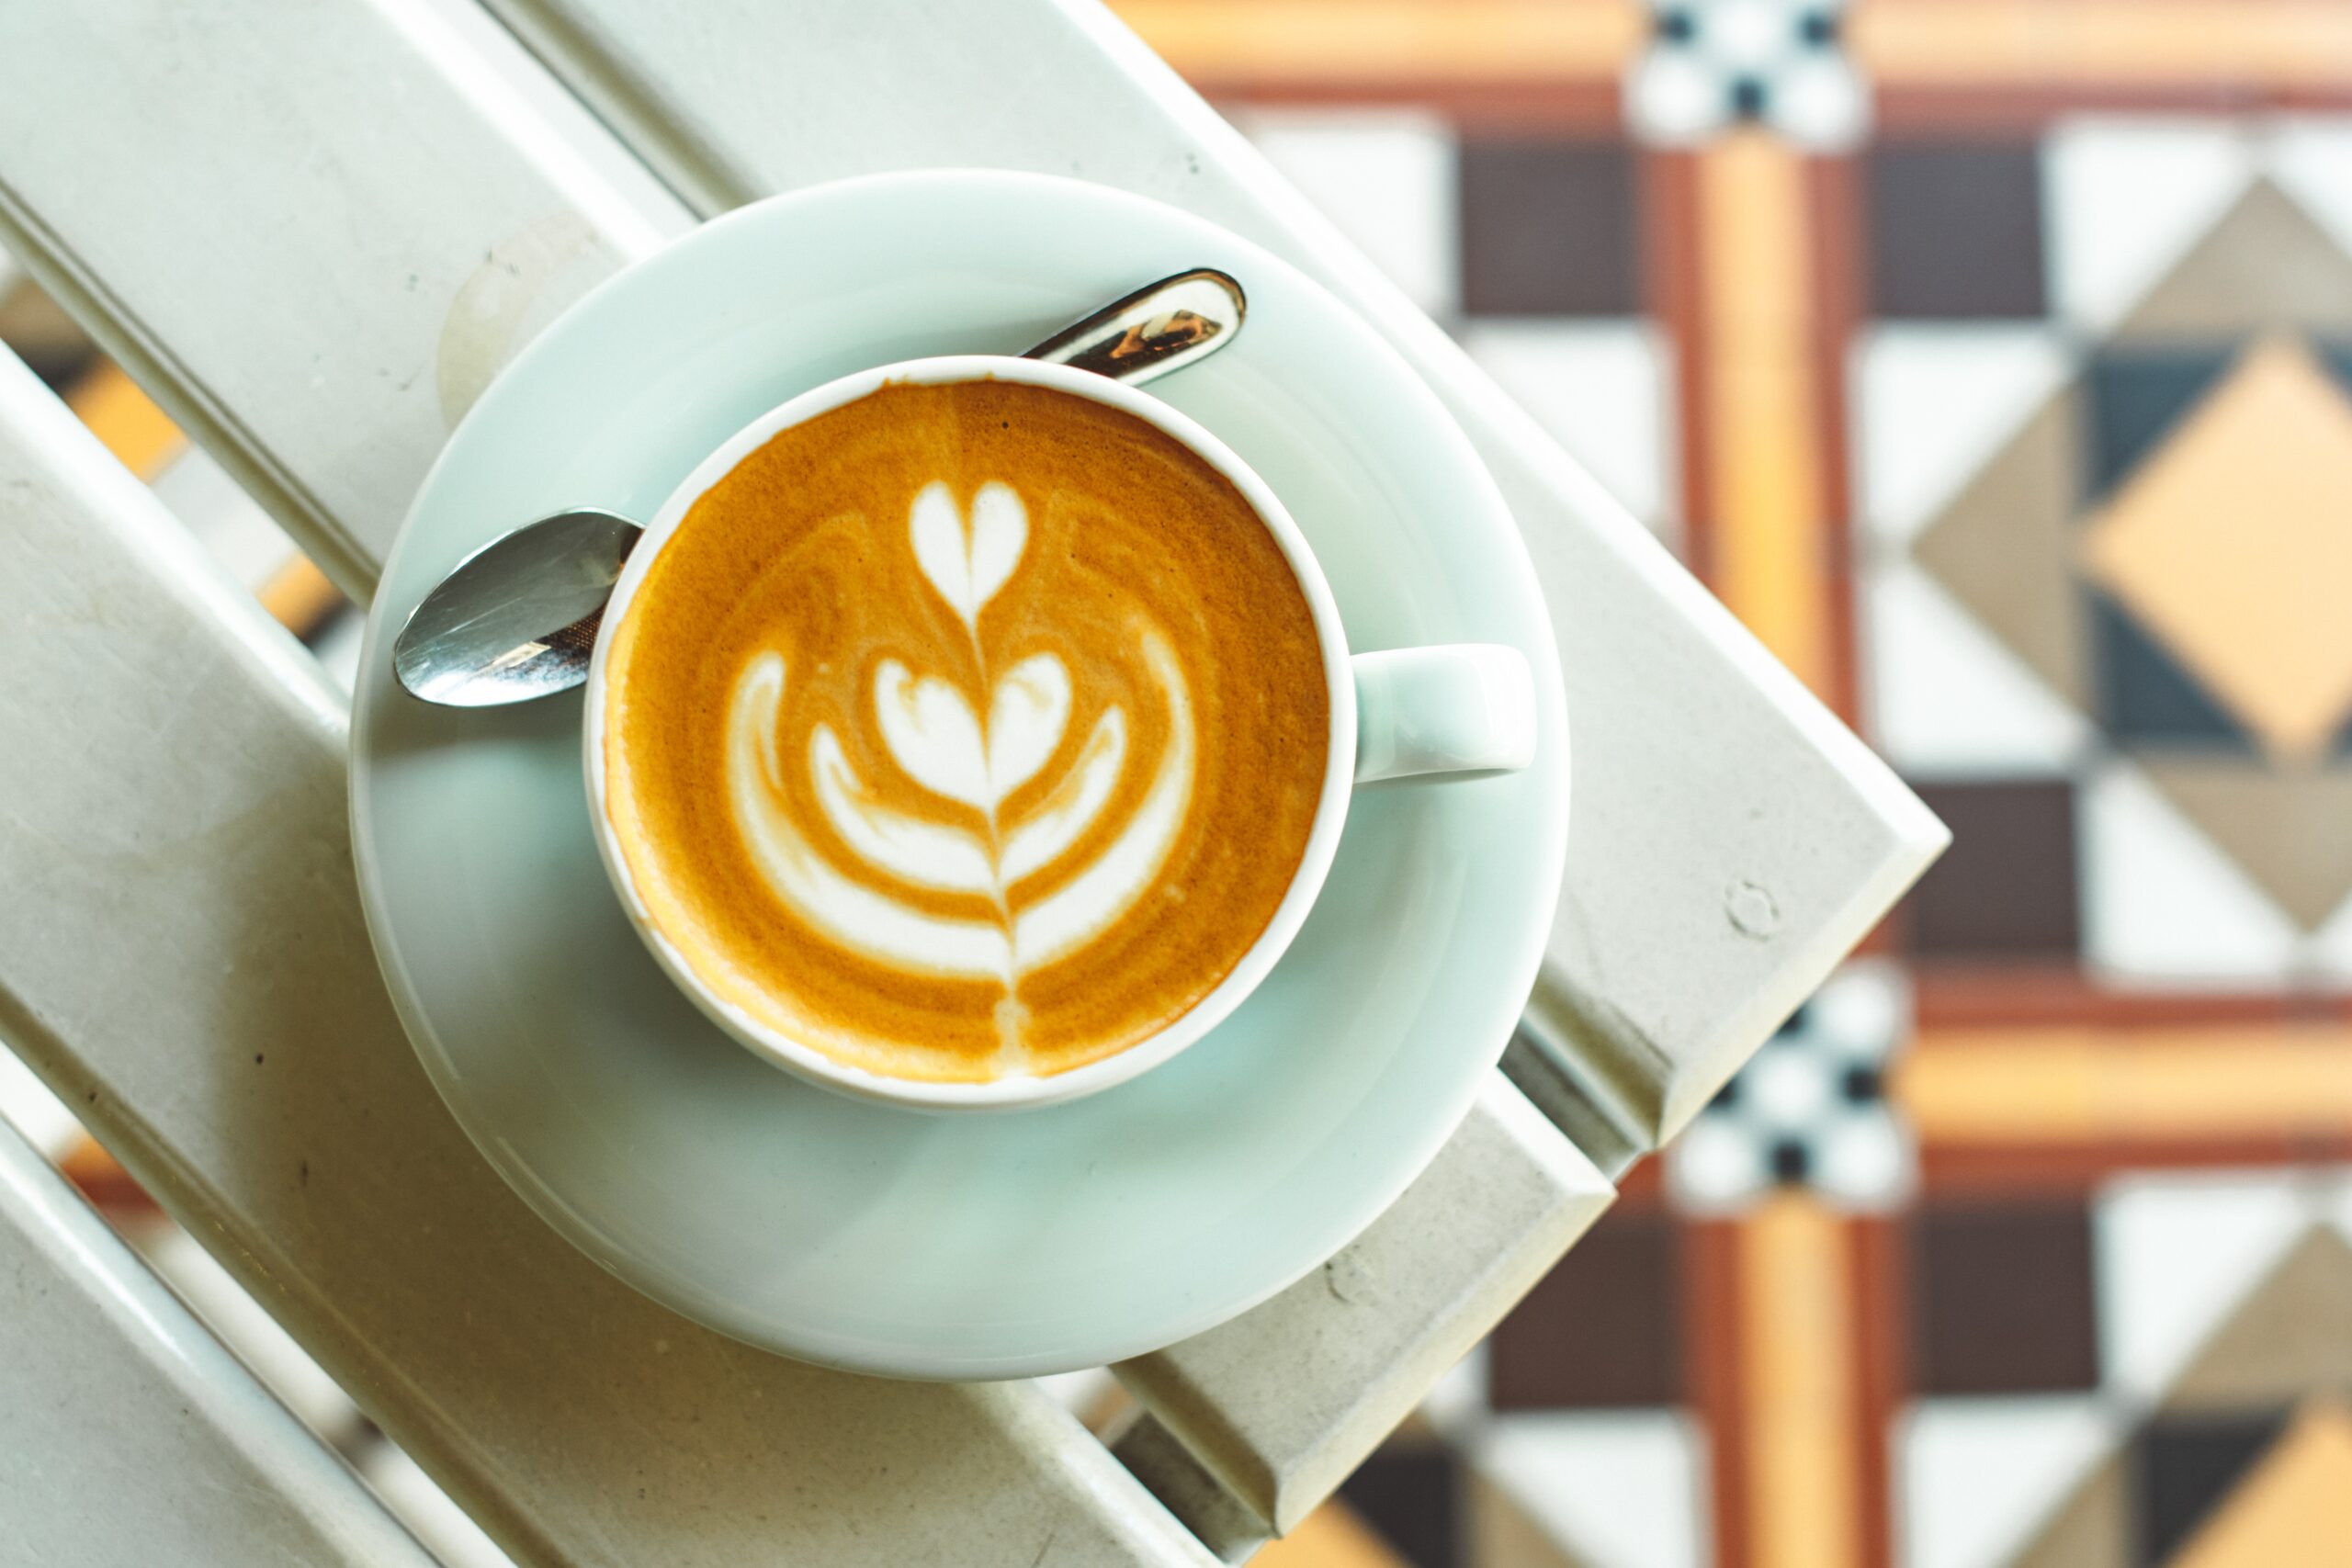 Decaf Vs Regular Coffee: Which is Better?